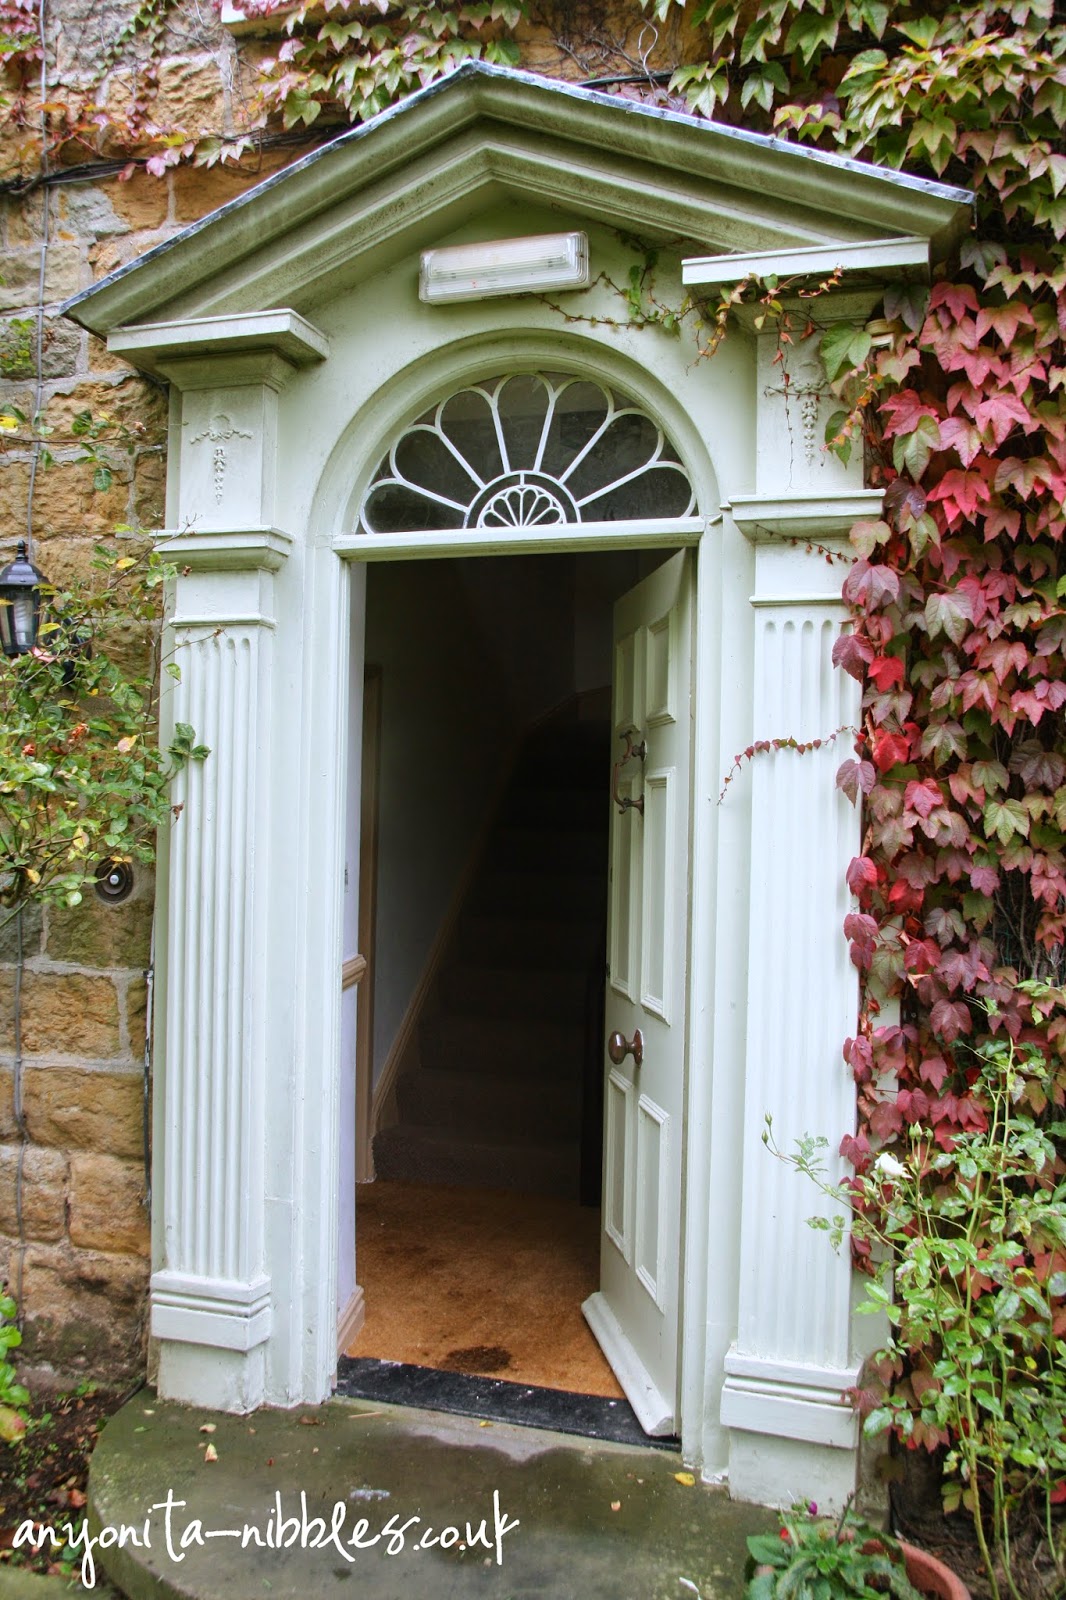 An open door creates an inviting atmosphere at Ox Pasture Hall Hotel | Anyonita-nibbles.co.uk